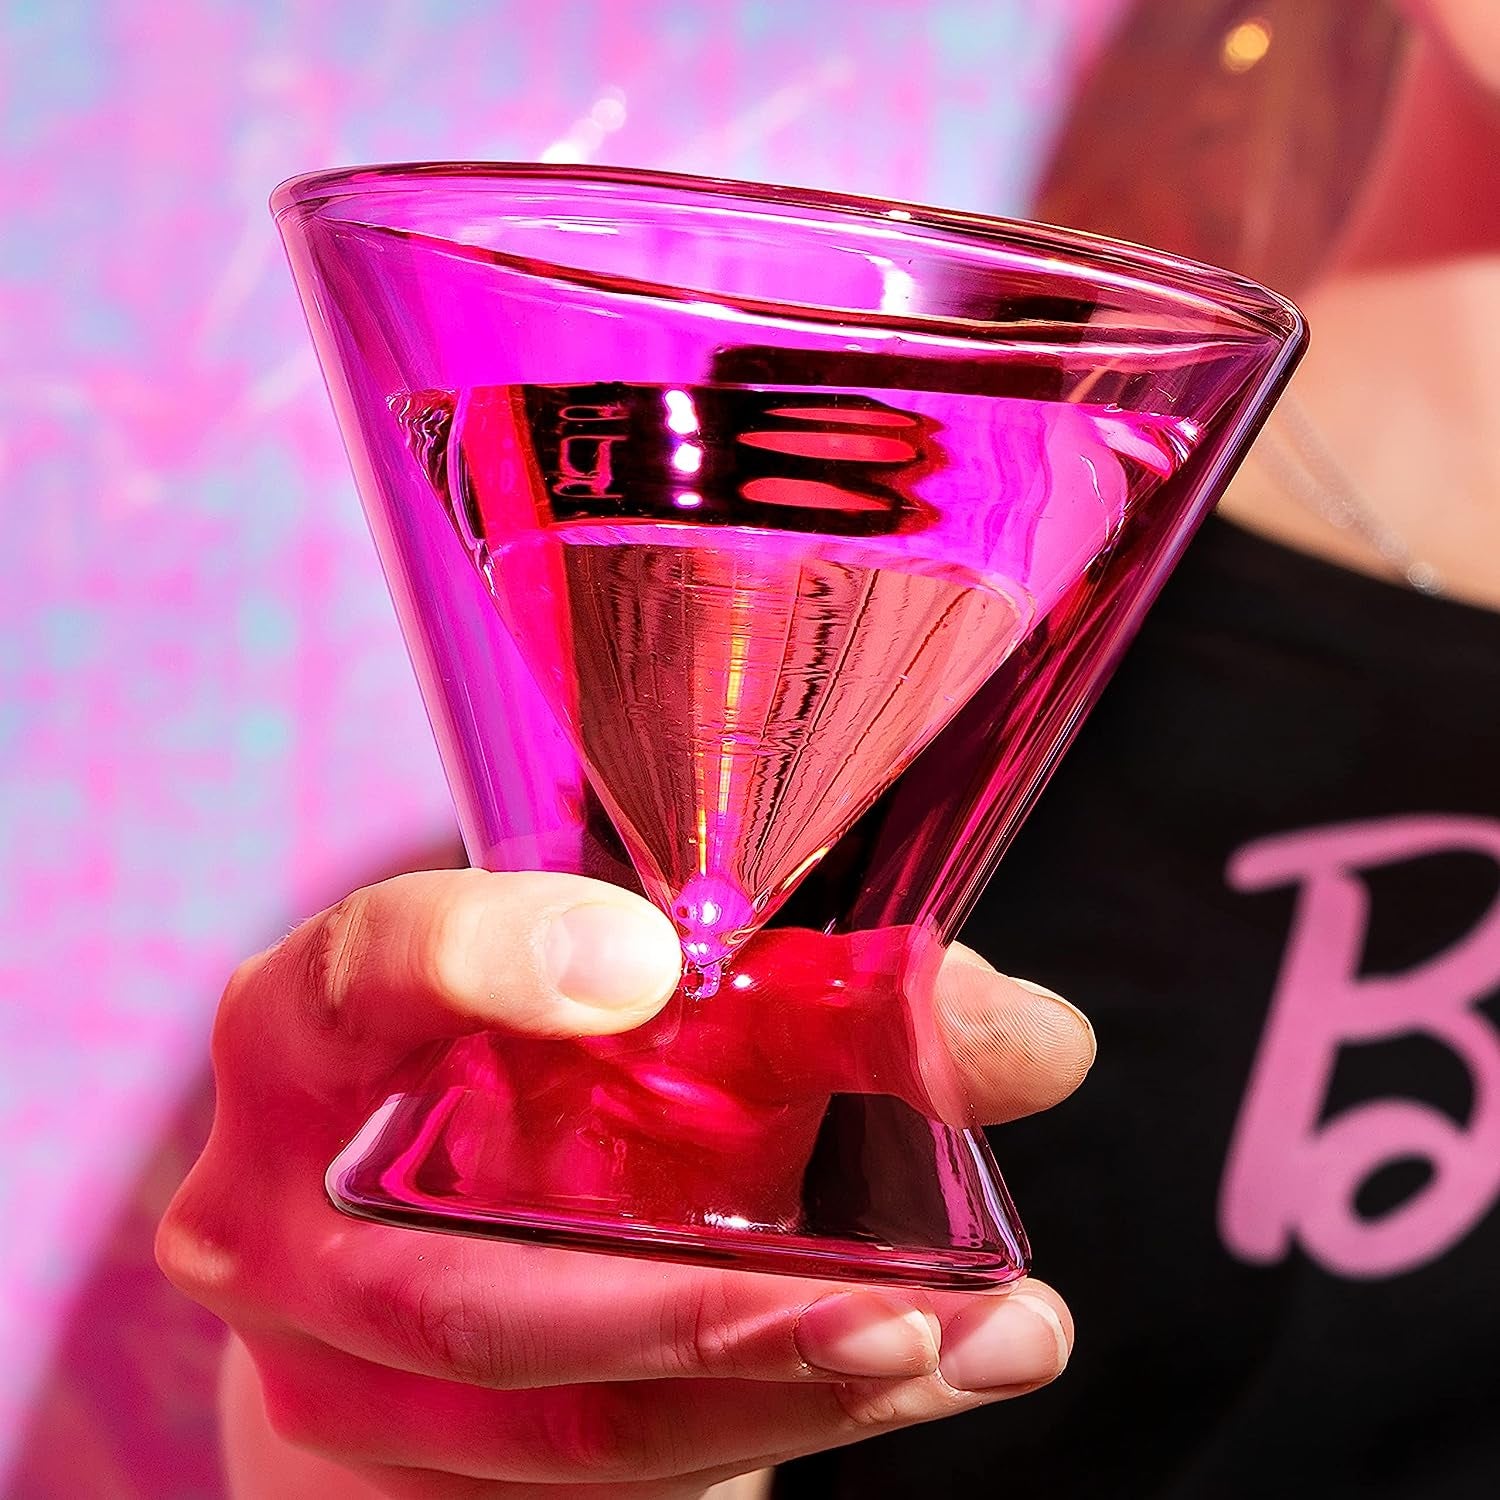 34 Products To Add Subtle Pops Of Barbie To Your Home